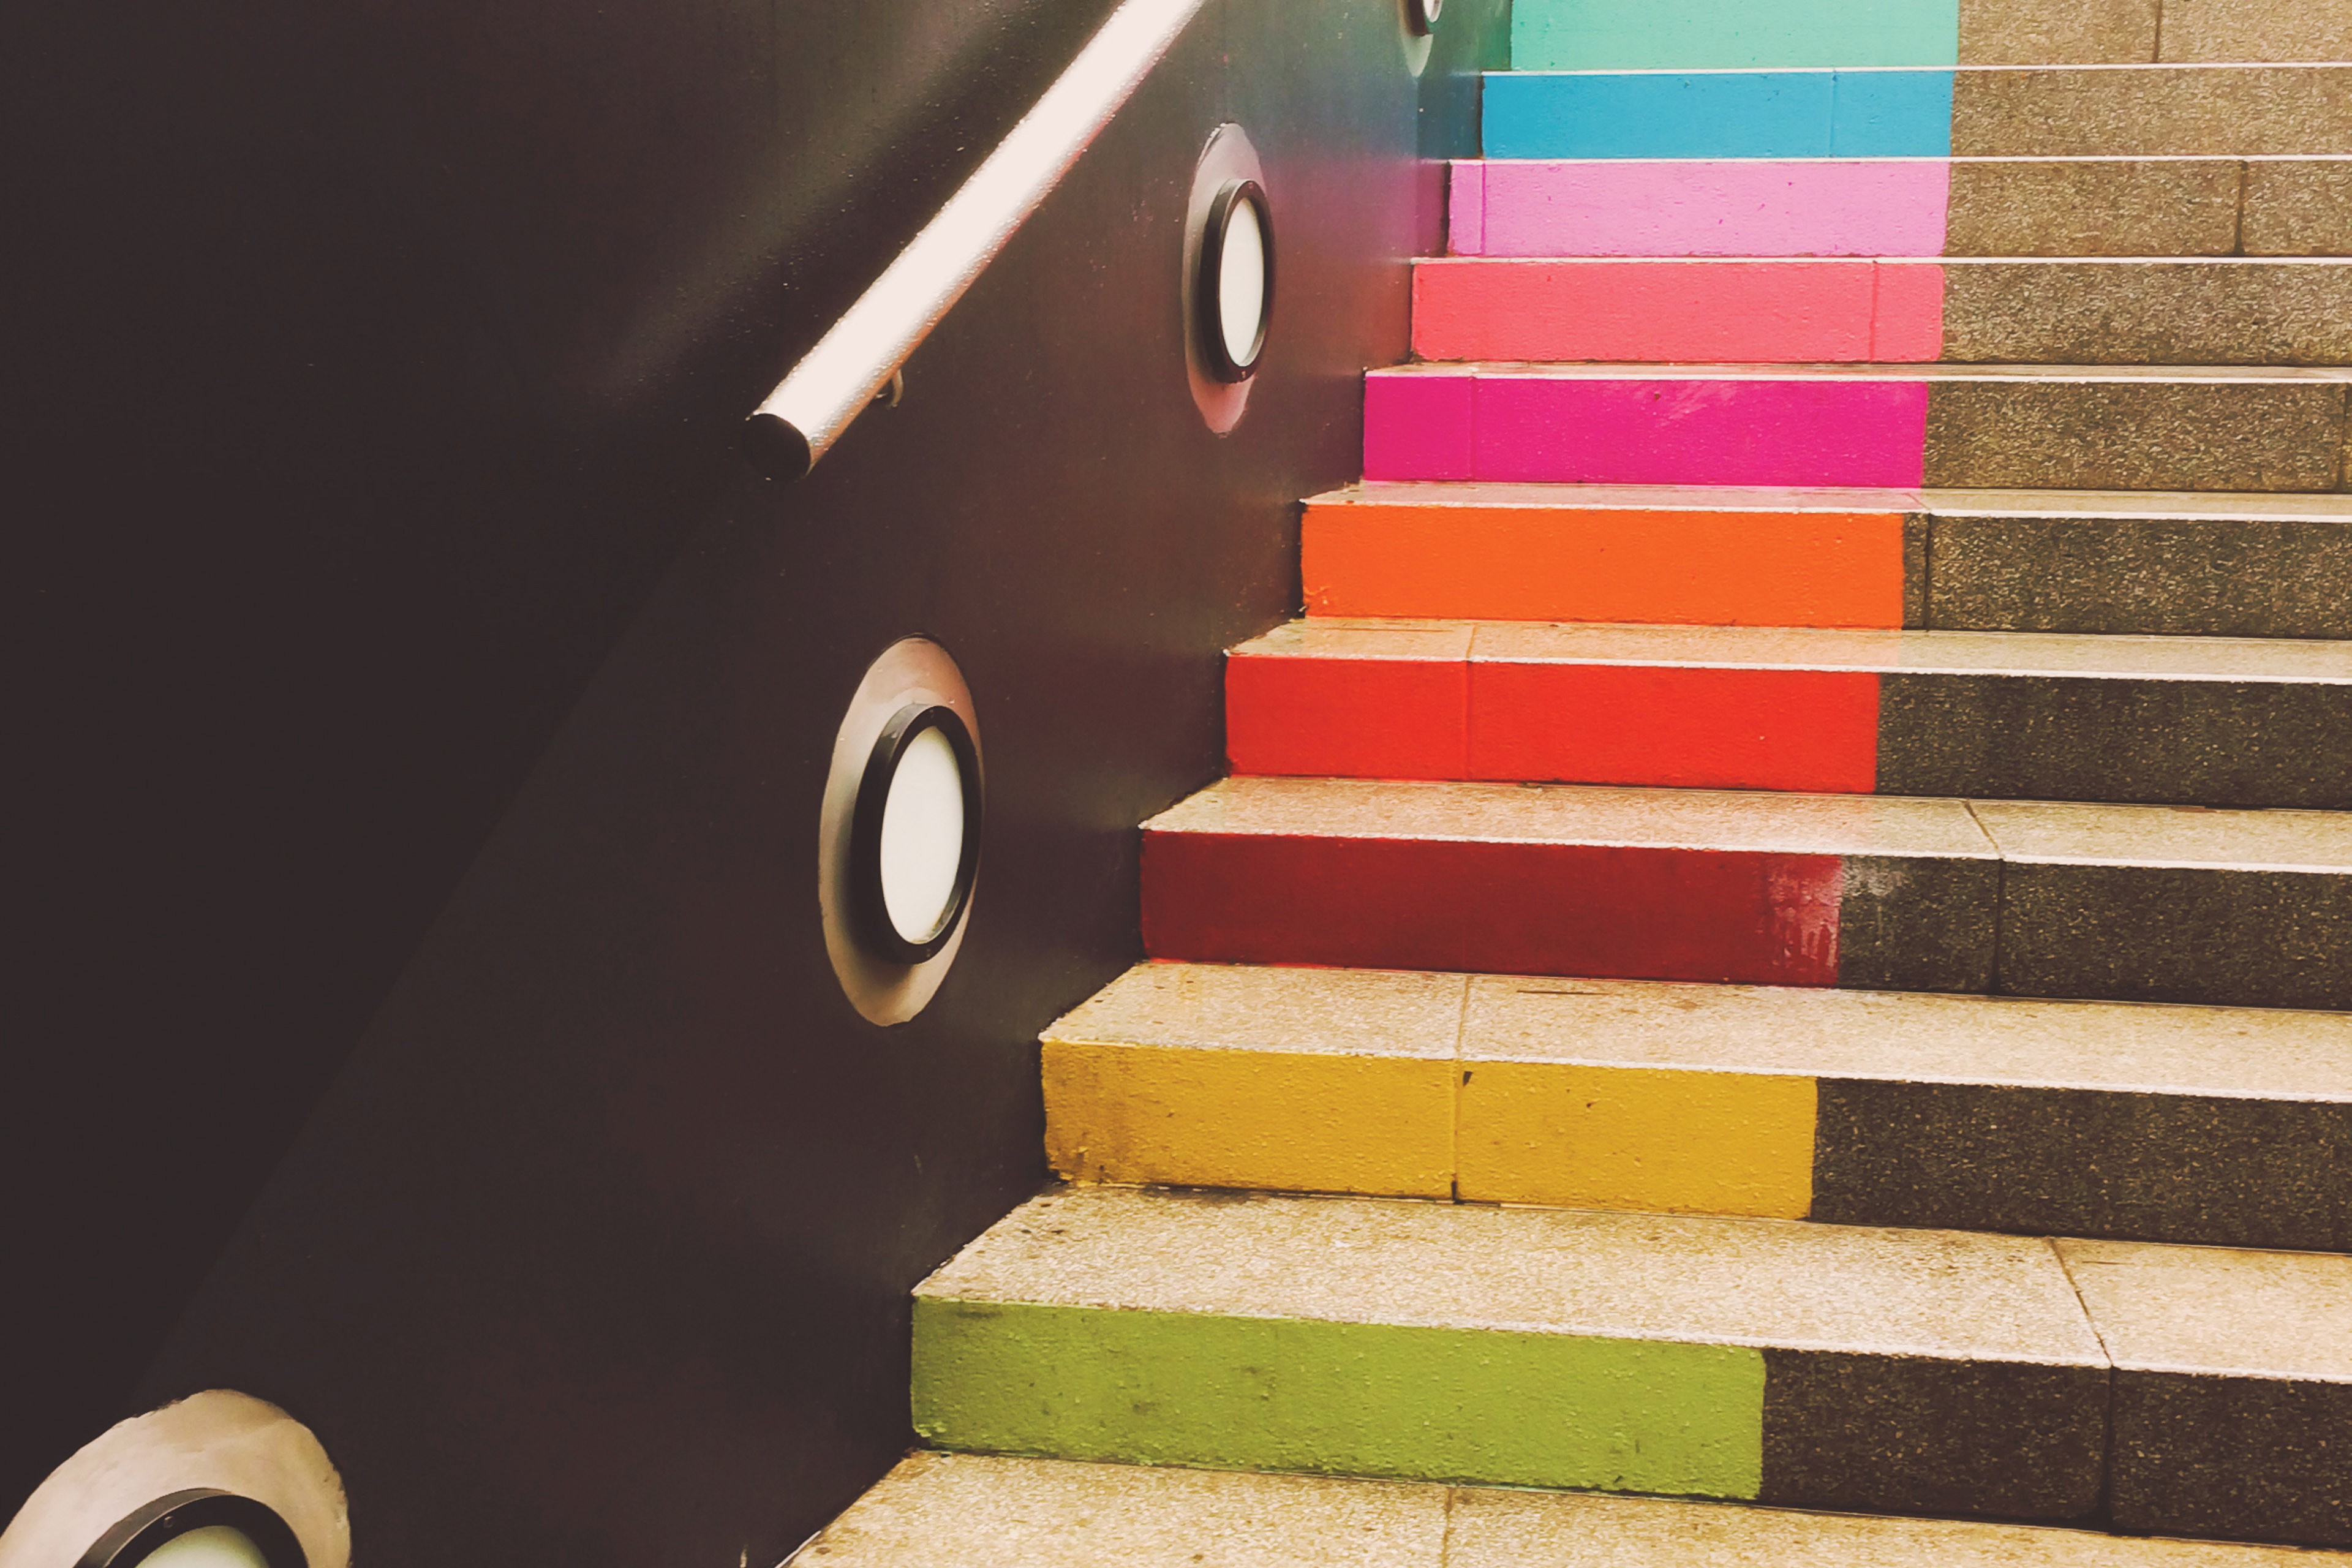 Colourful stairs